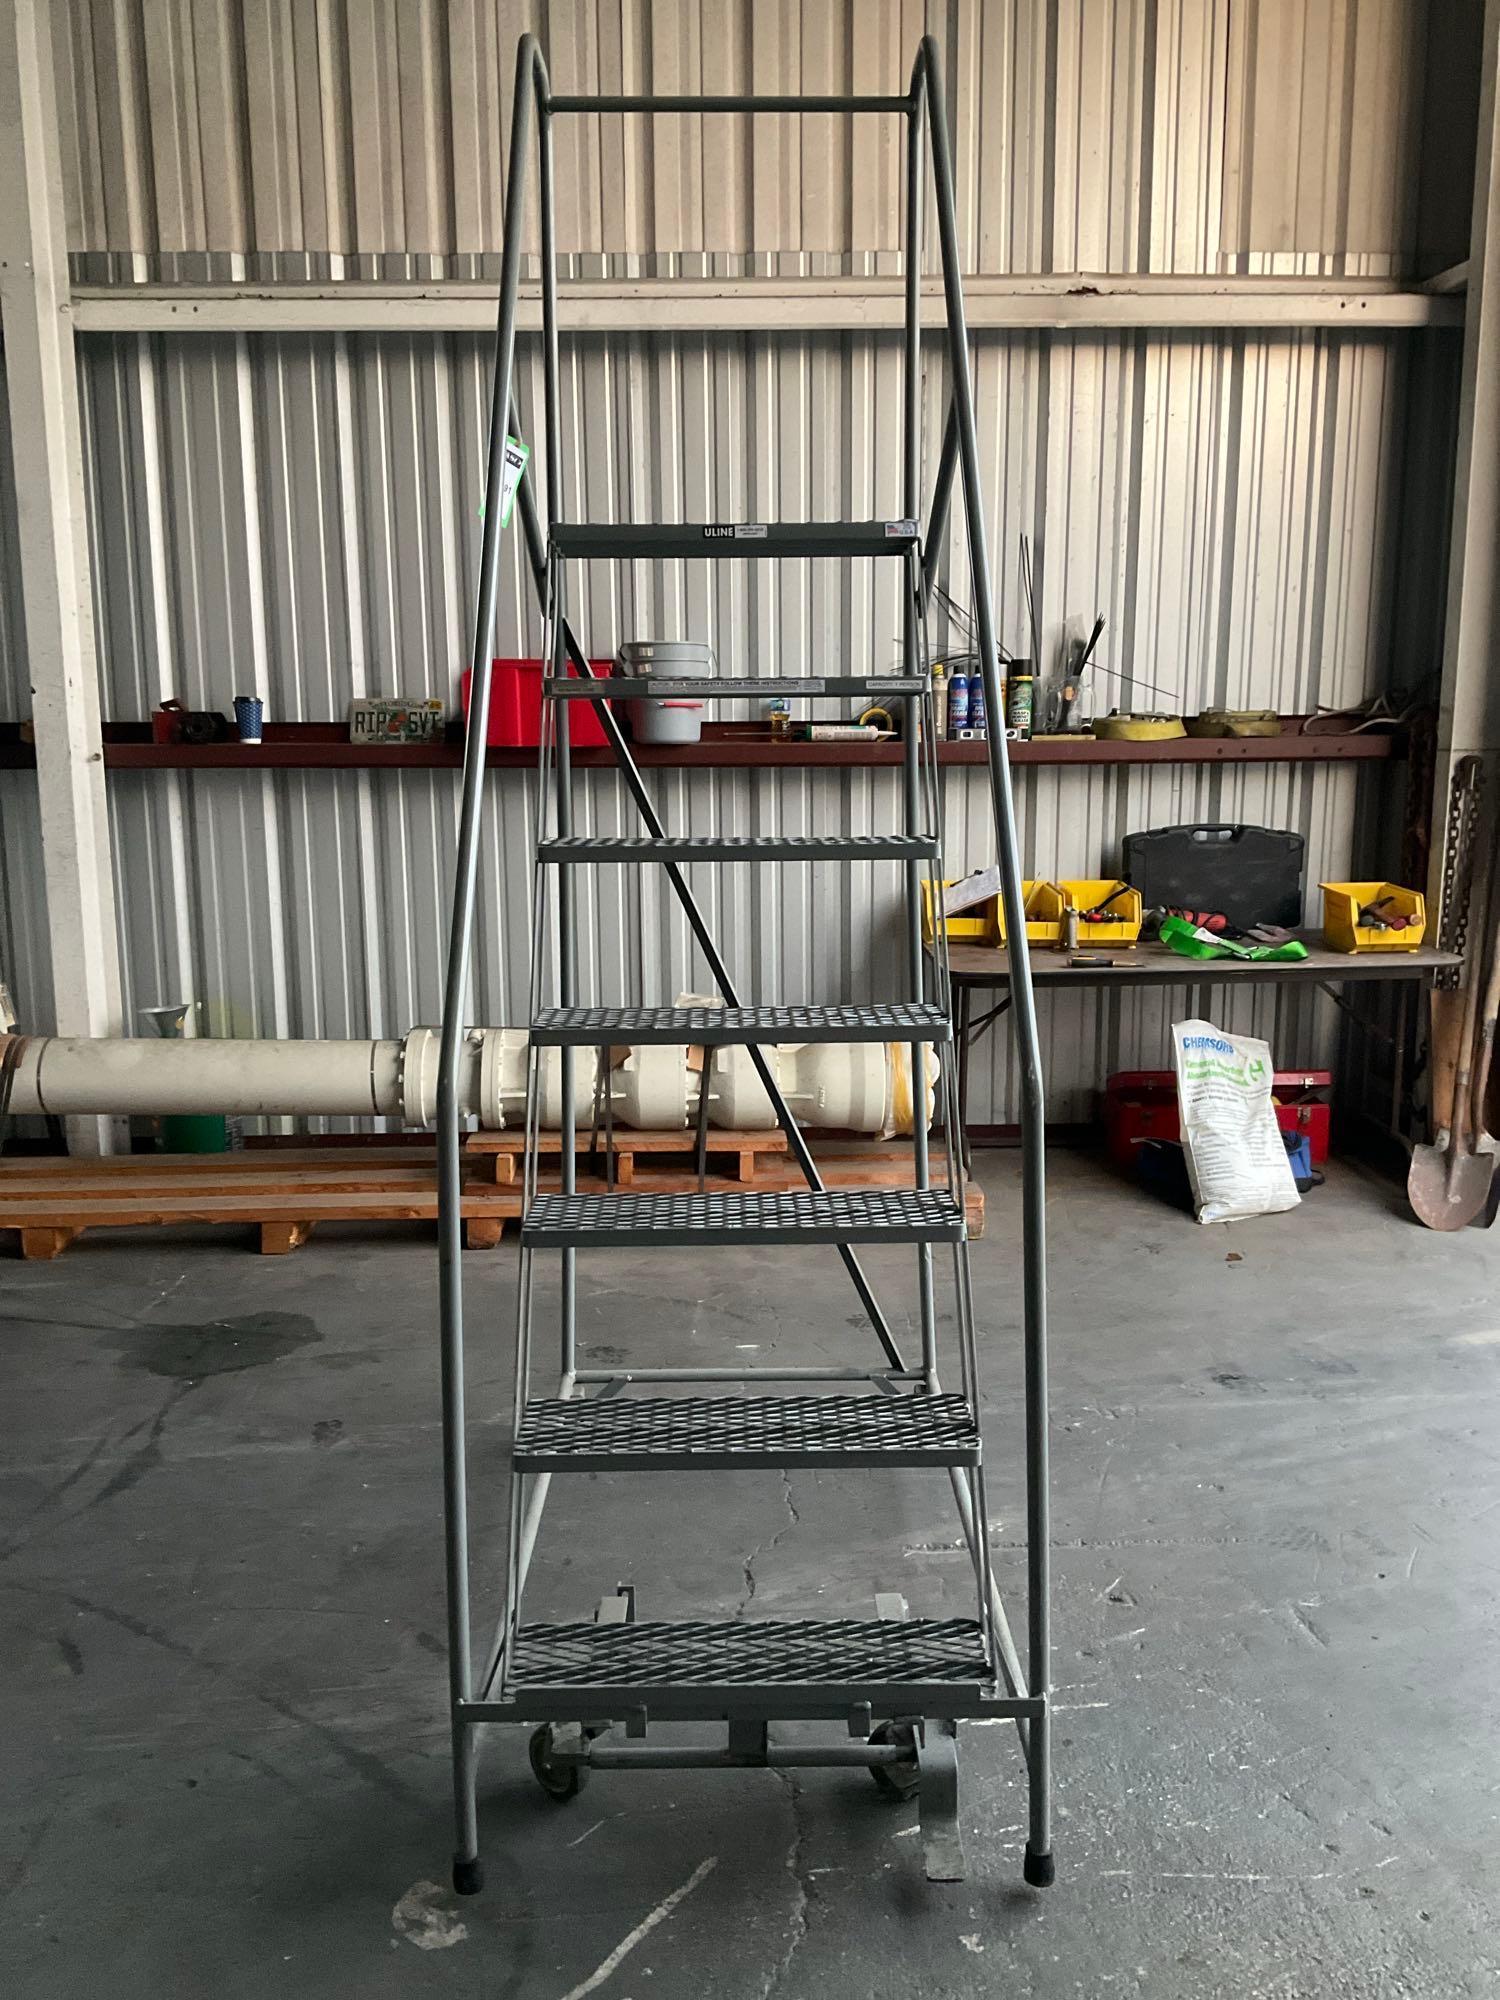 ULINE...SAFETY LADDER WITH WHEELS , APPROX 100? T